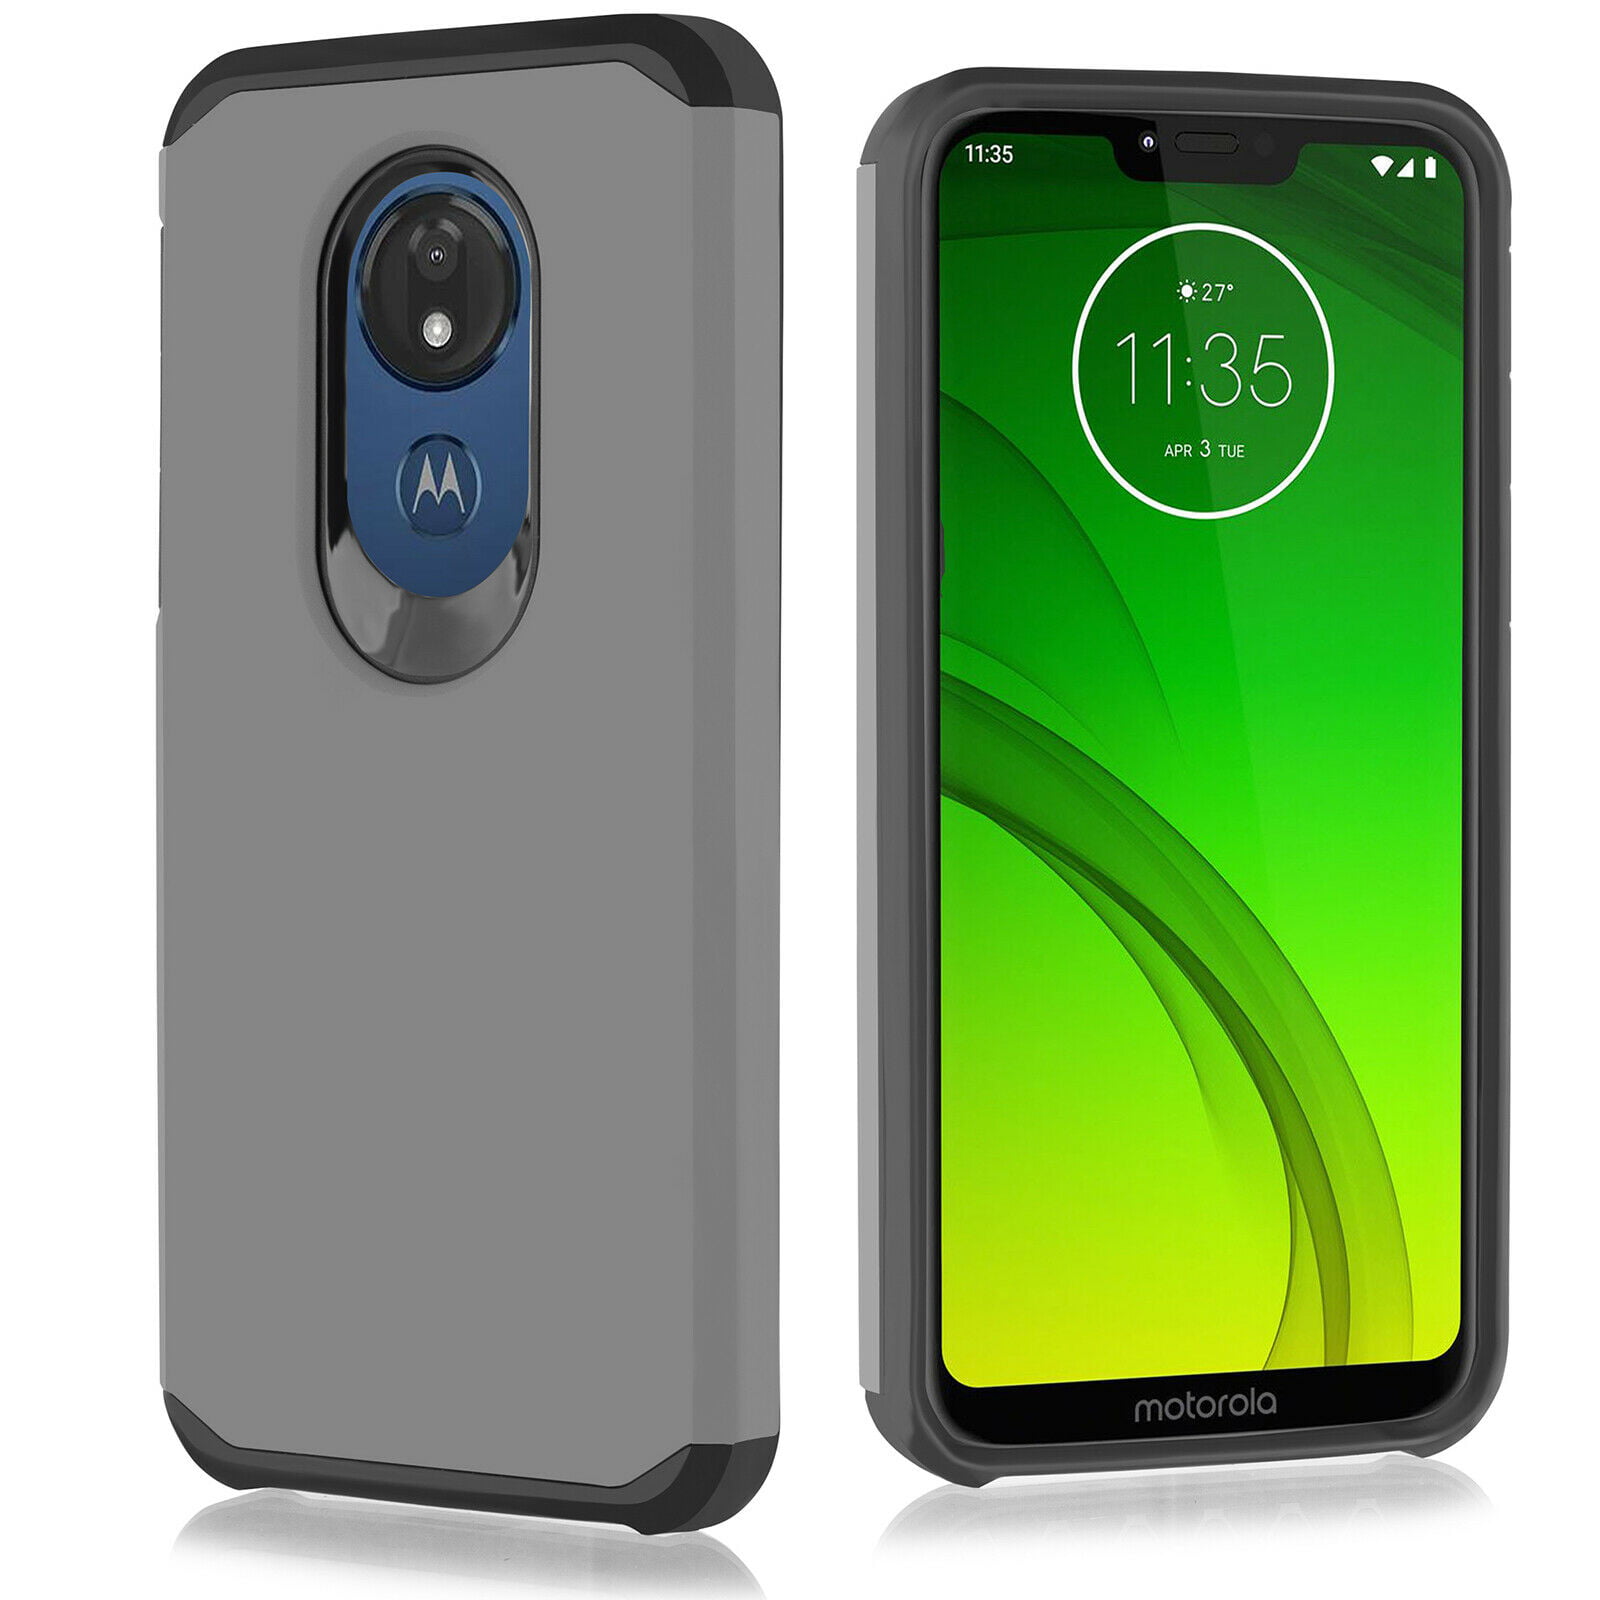 OEAGO Motorola Moto g7 Play Cases with ,Dual Layer Shock Proof Protective Rugged Protective Case Cover-Navy Blue HD Screen Protector